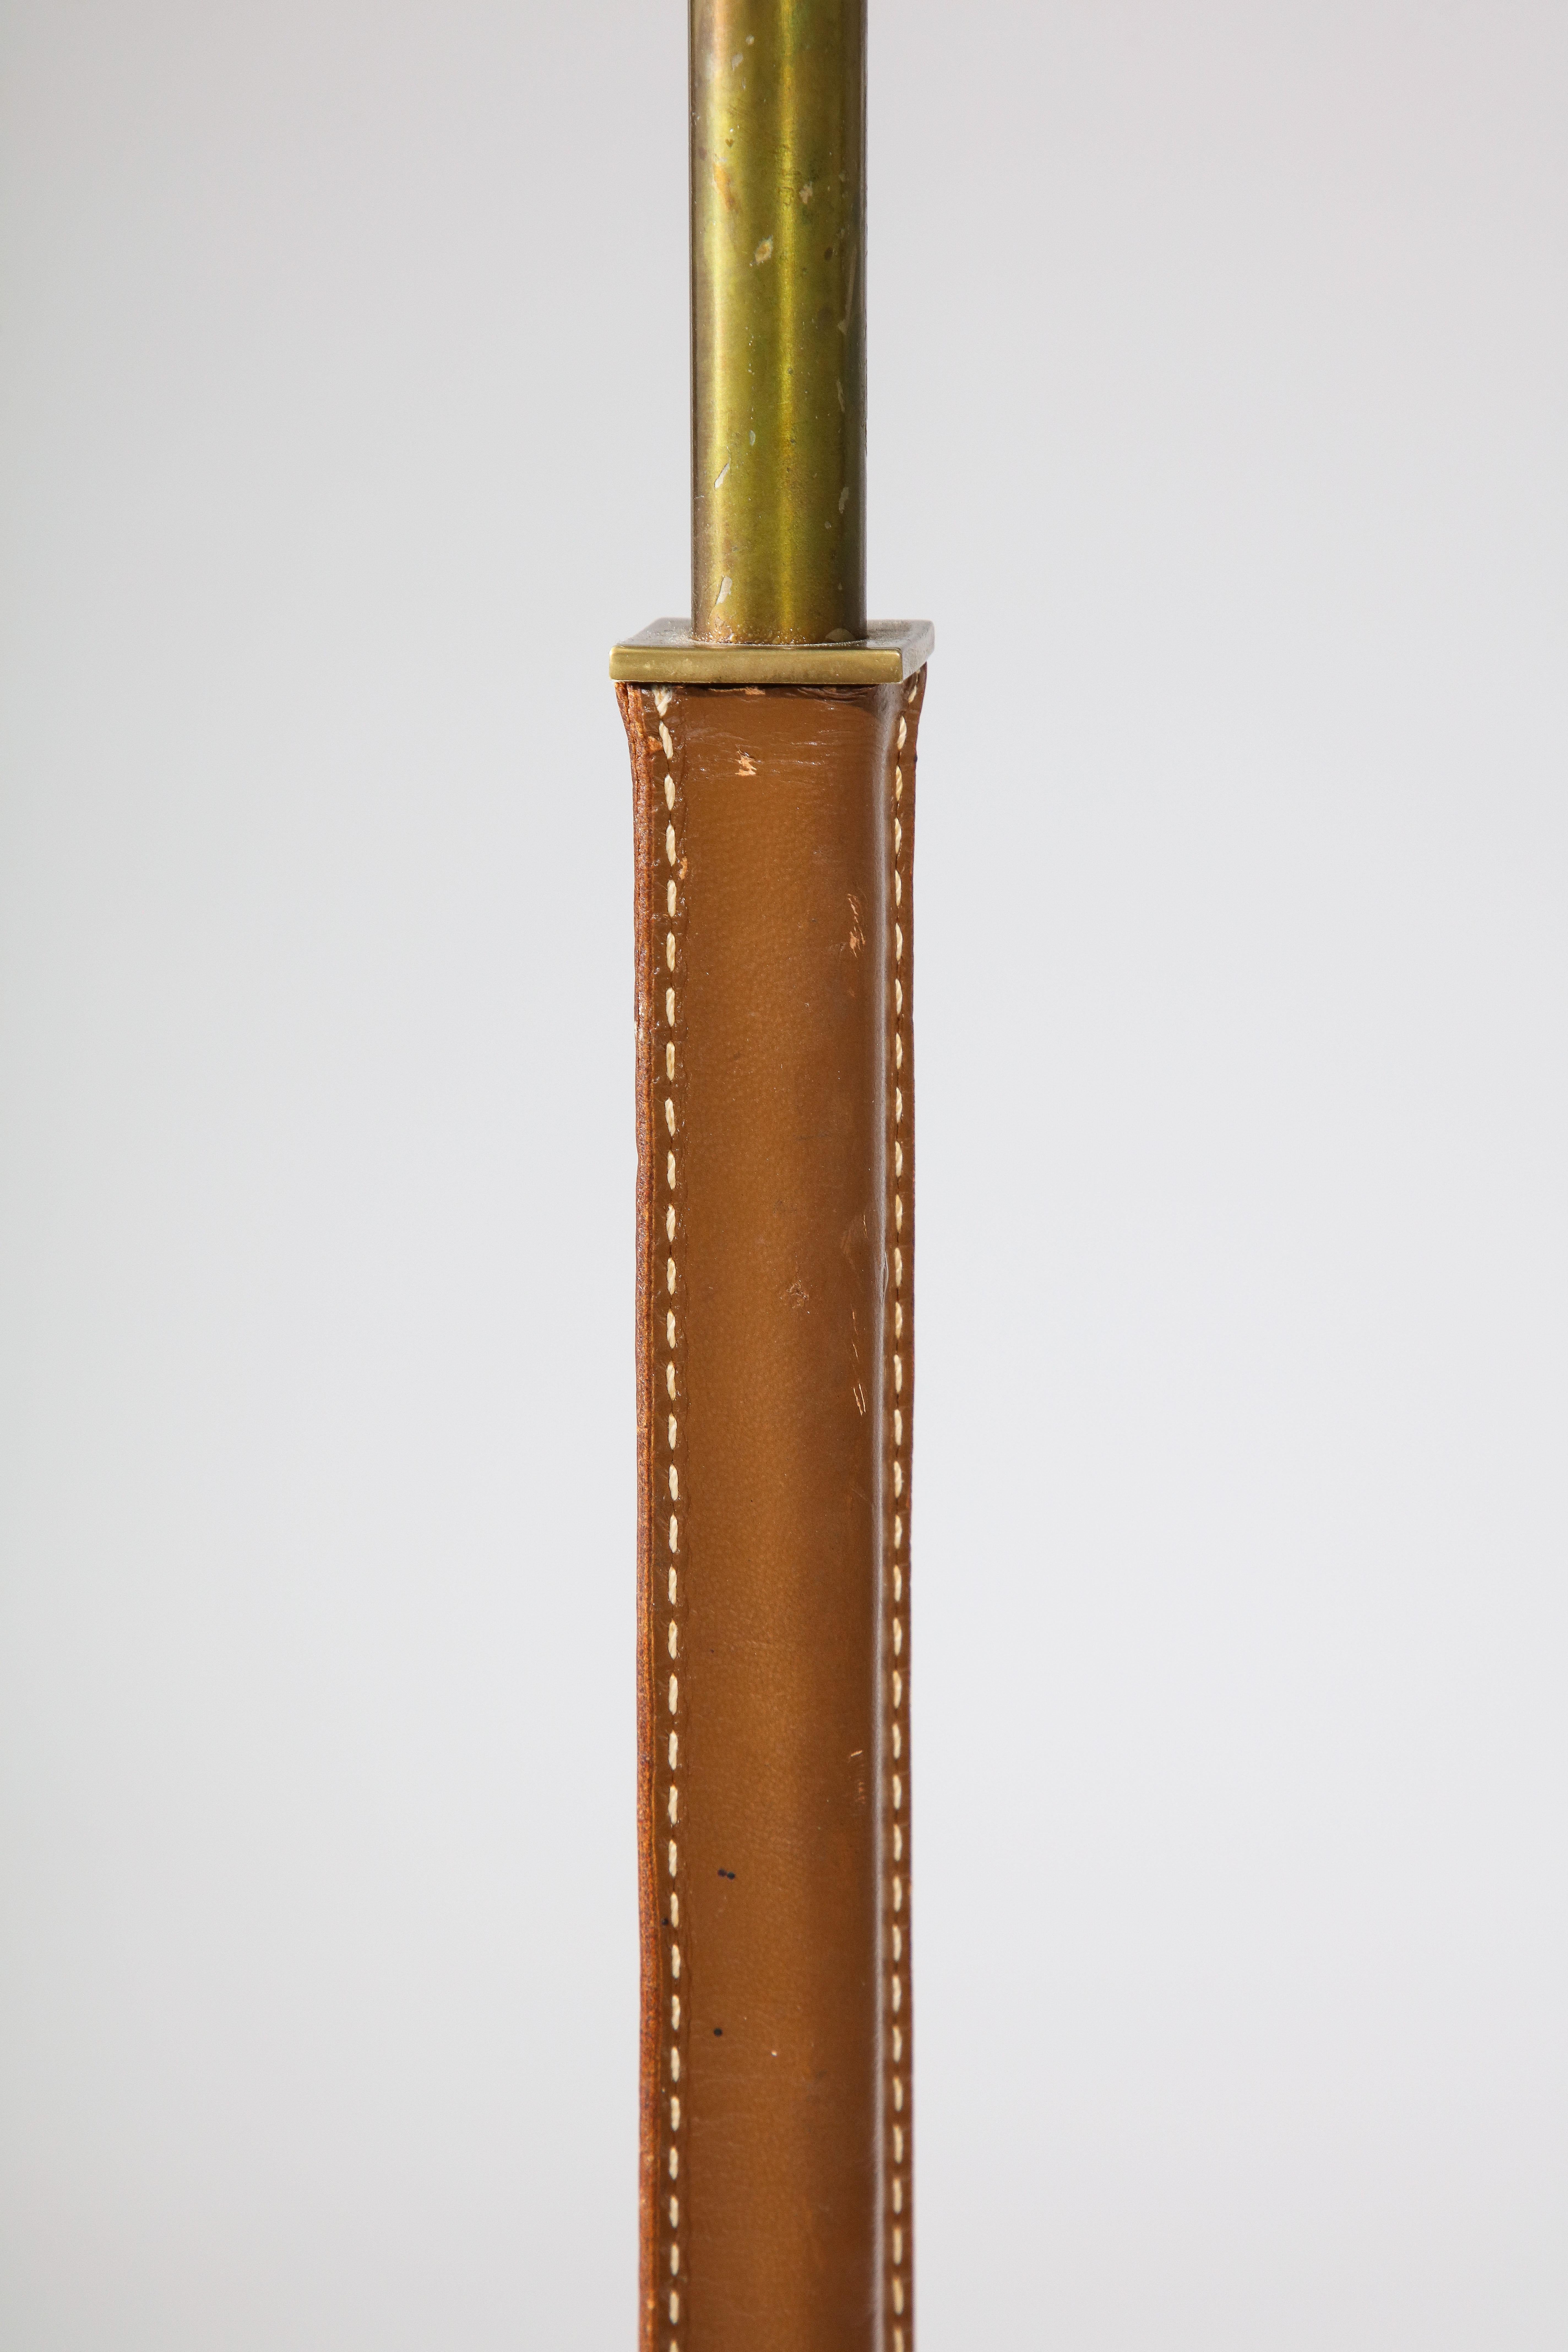 Brass and Leather Floor Lamp by Falkenbergs Belysning, Sweden, c. 1950 For Sale 7